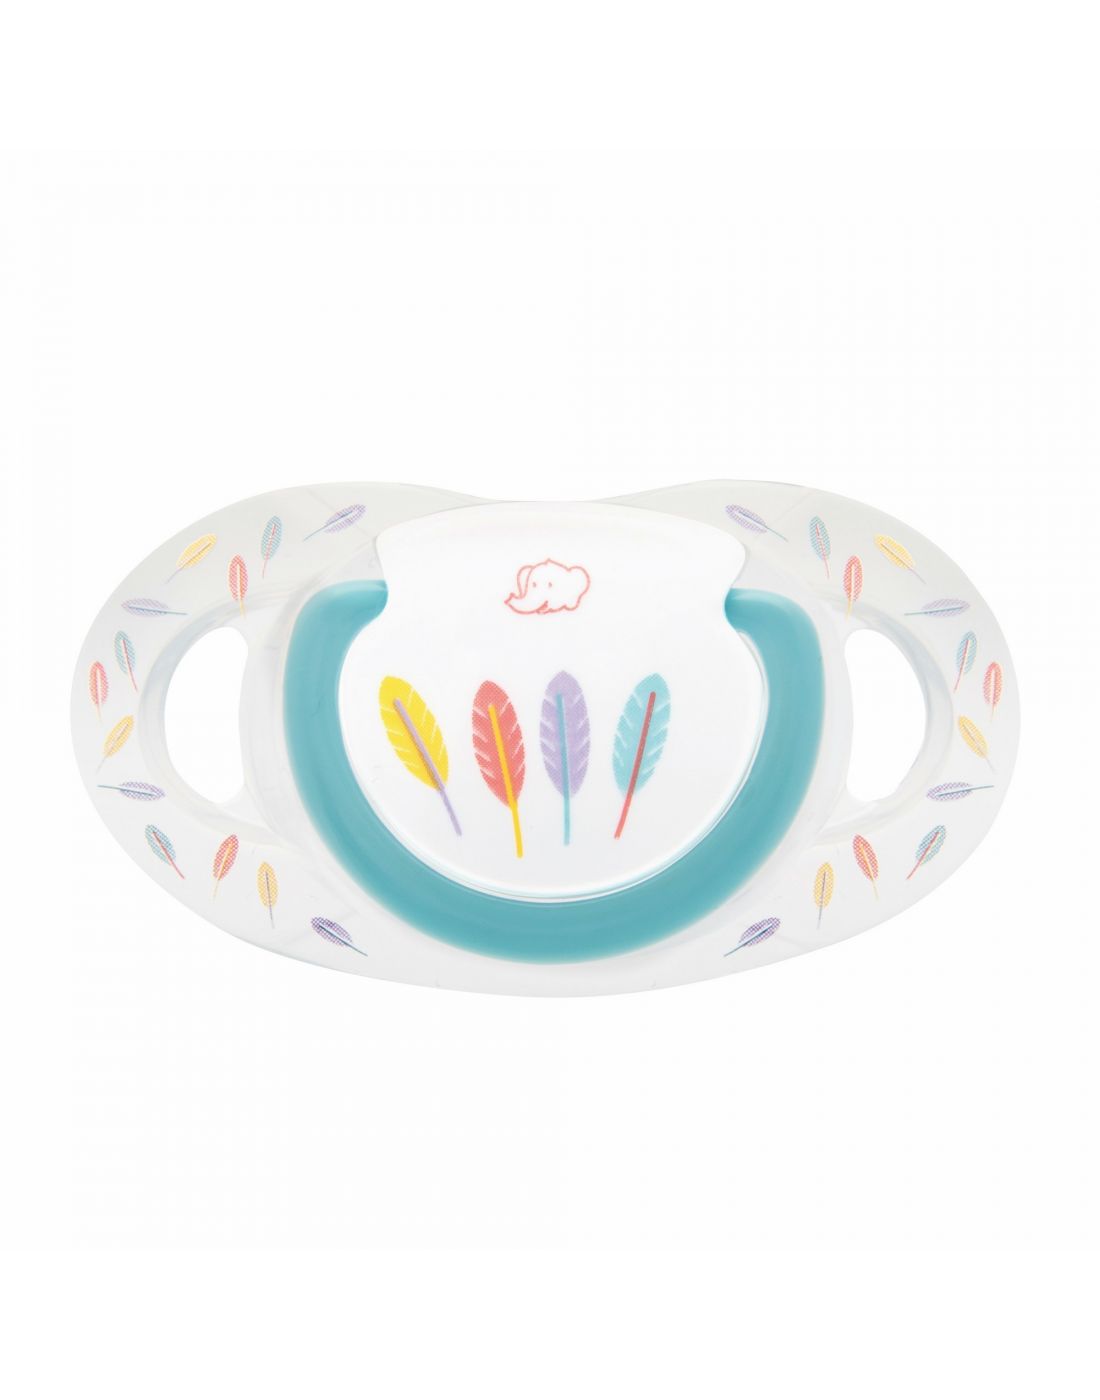 Bebe Confort Baby Silicone Soother Natural Physio 0-6M